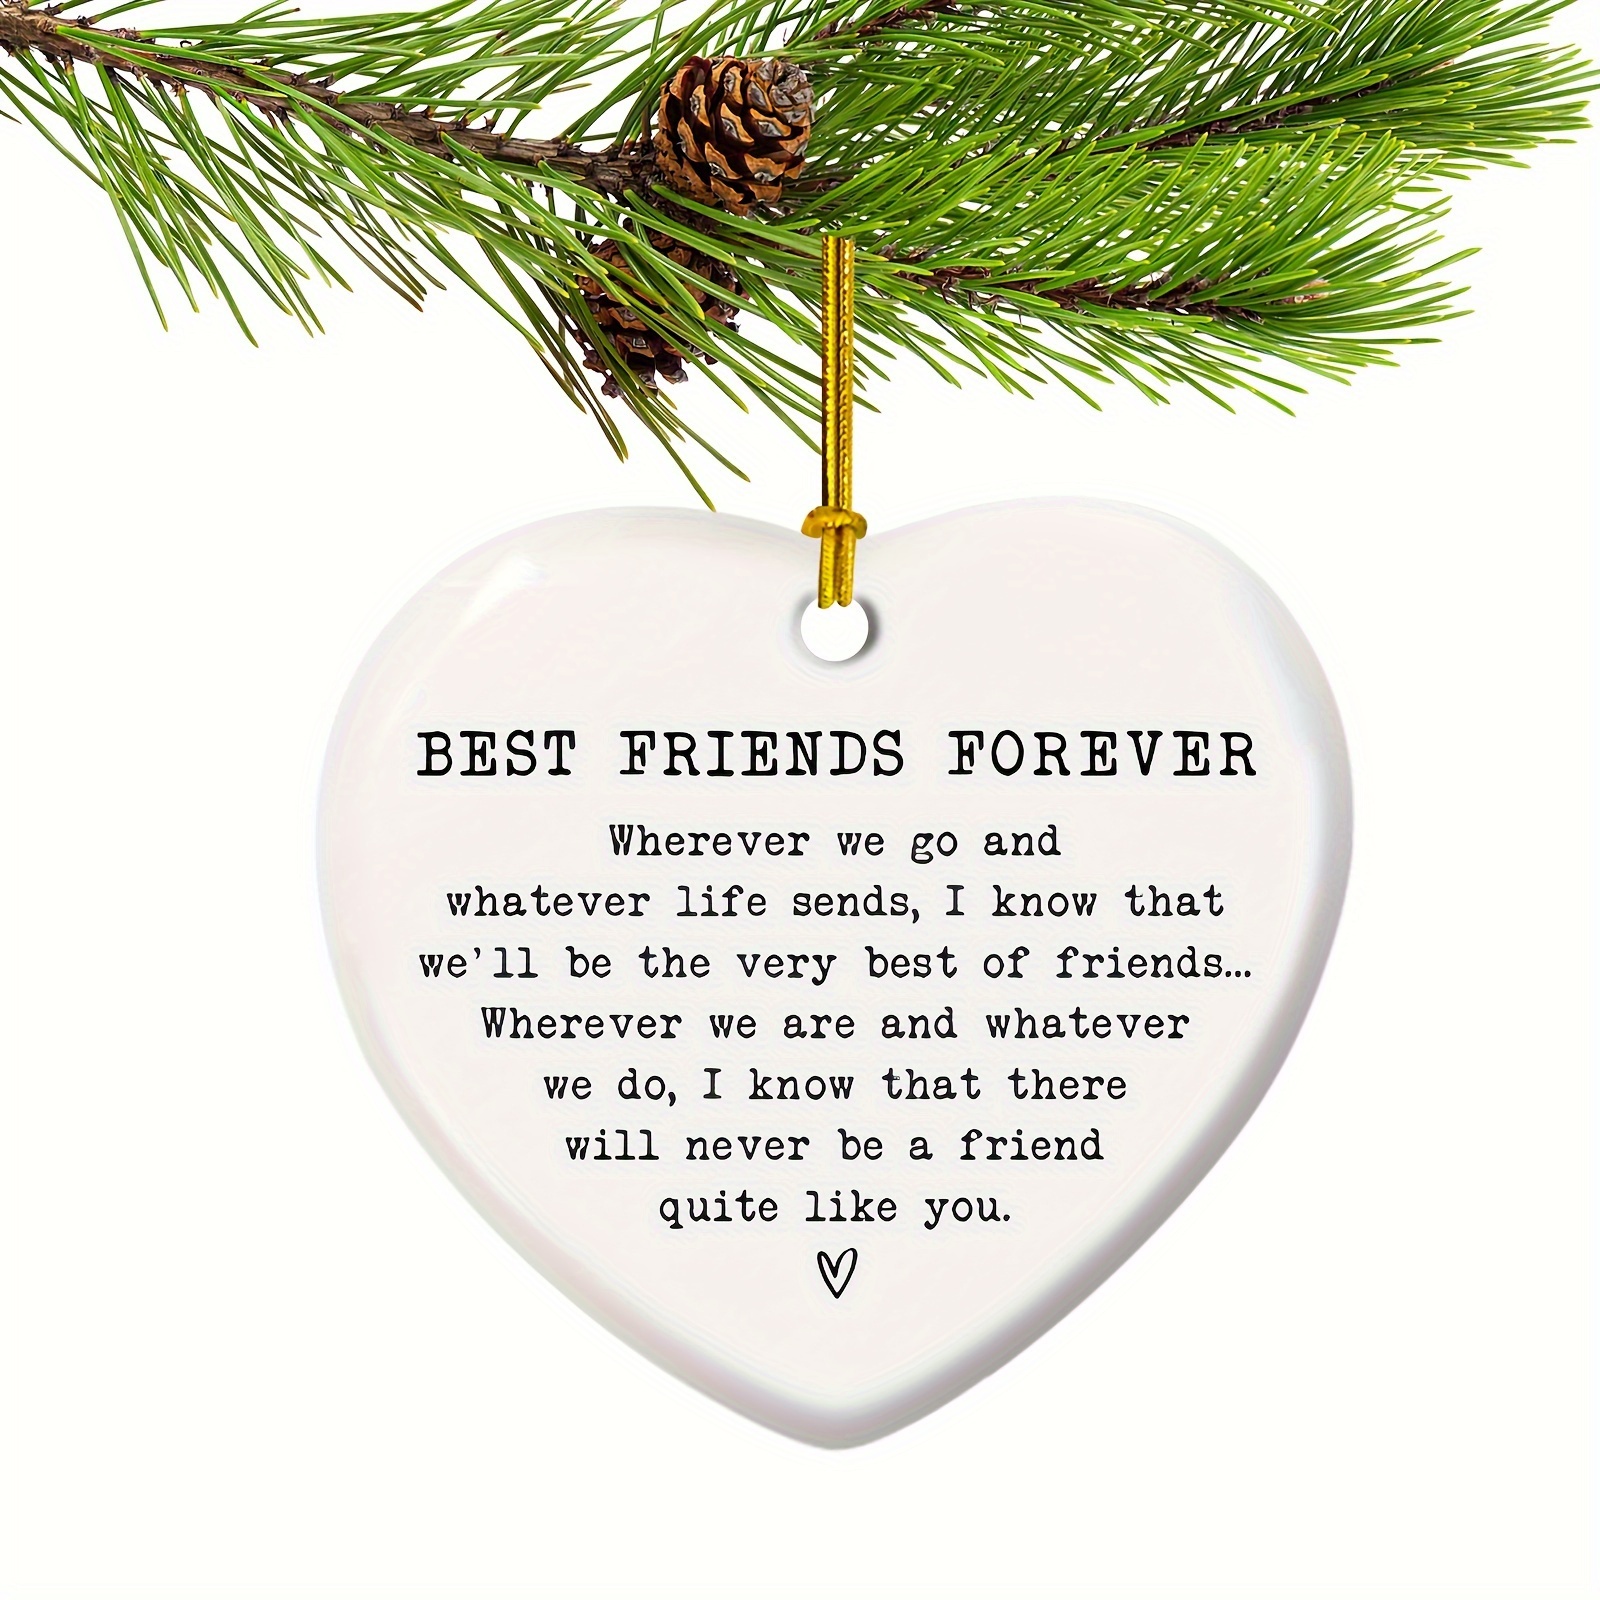 Best Friends Gifts for Women Unique Friendship Birthday Gifts for Women  Friend BFF Sister Girls, Best Friend Definition Gift for Friends Female